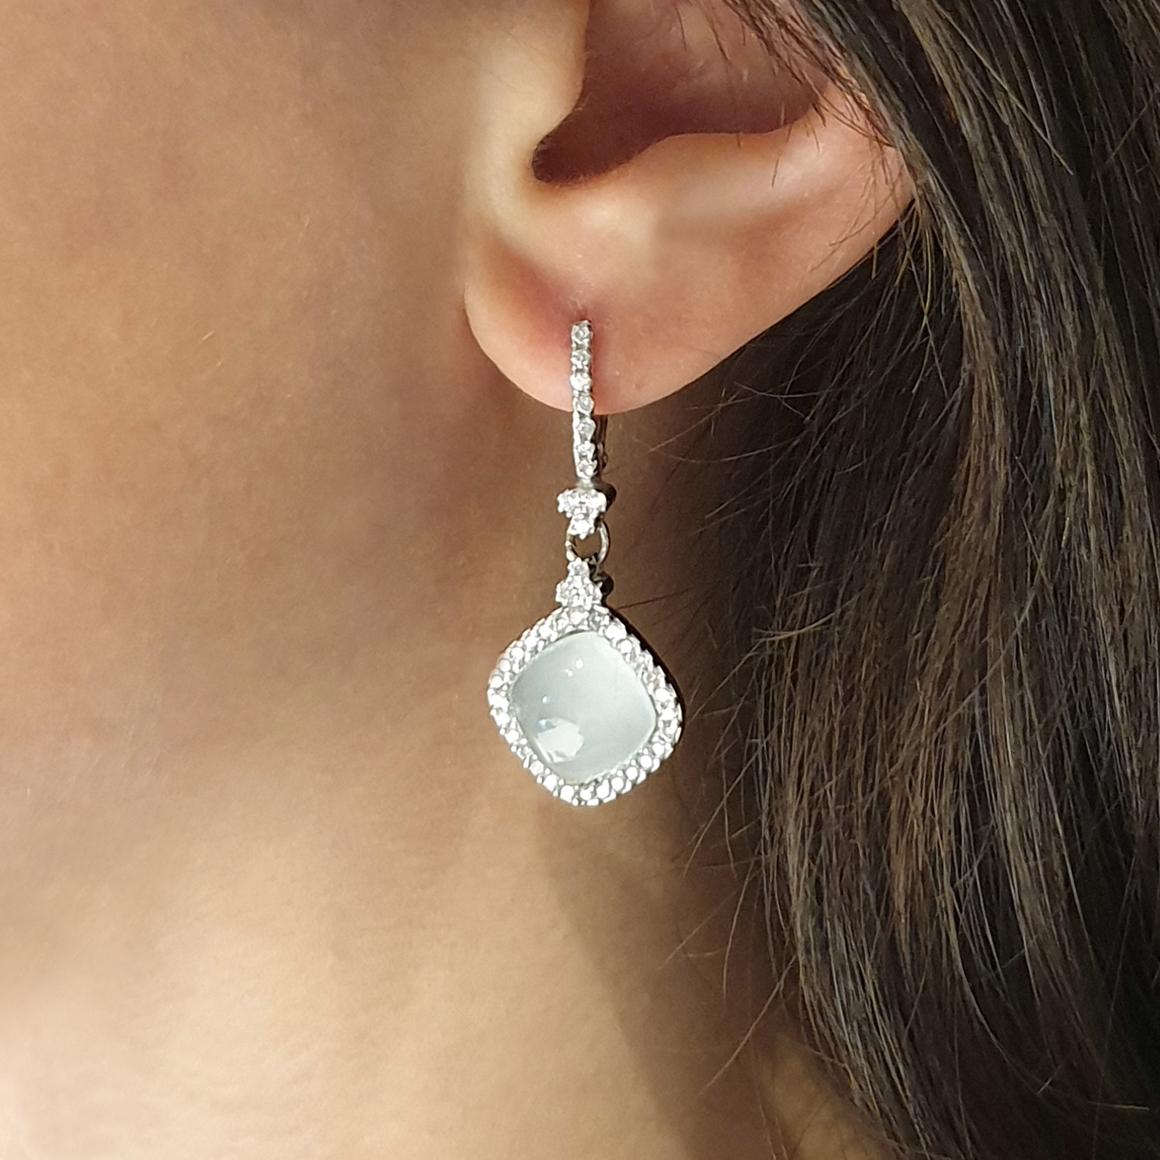  Elegant design earrings that lend a class to just any outfit , made in Italy by Stanoppi Jewellery.   Beautiful colored stones that enhance the elegance and refinement of the jewel.
Earrings in 18k white gold with Aquamarine Milk (square cabochon